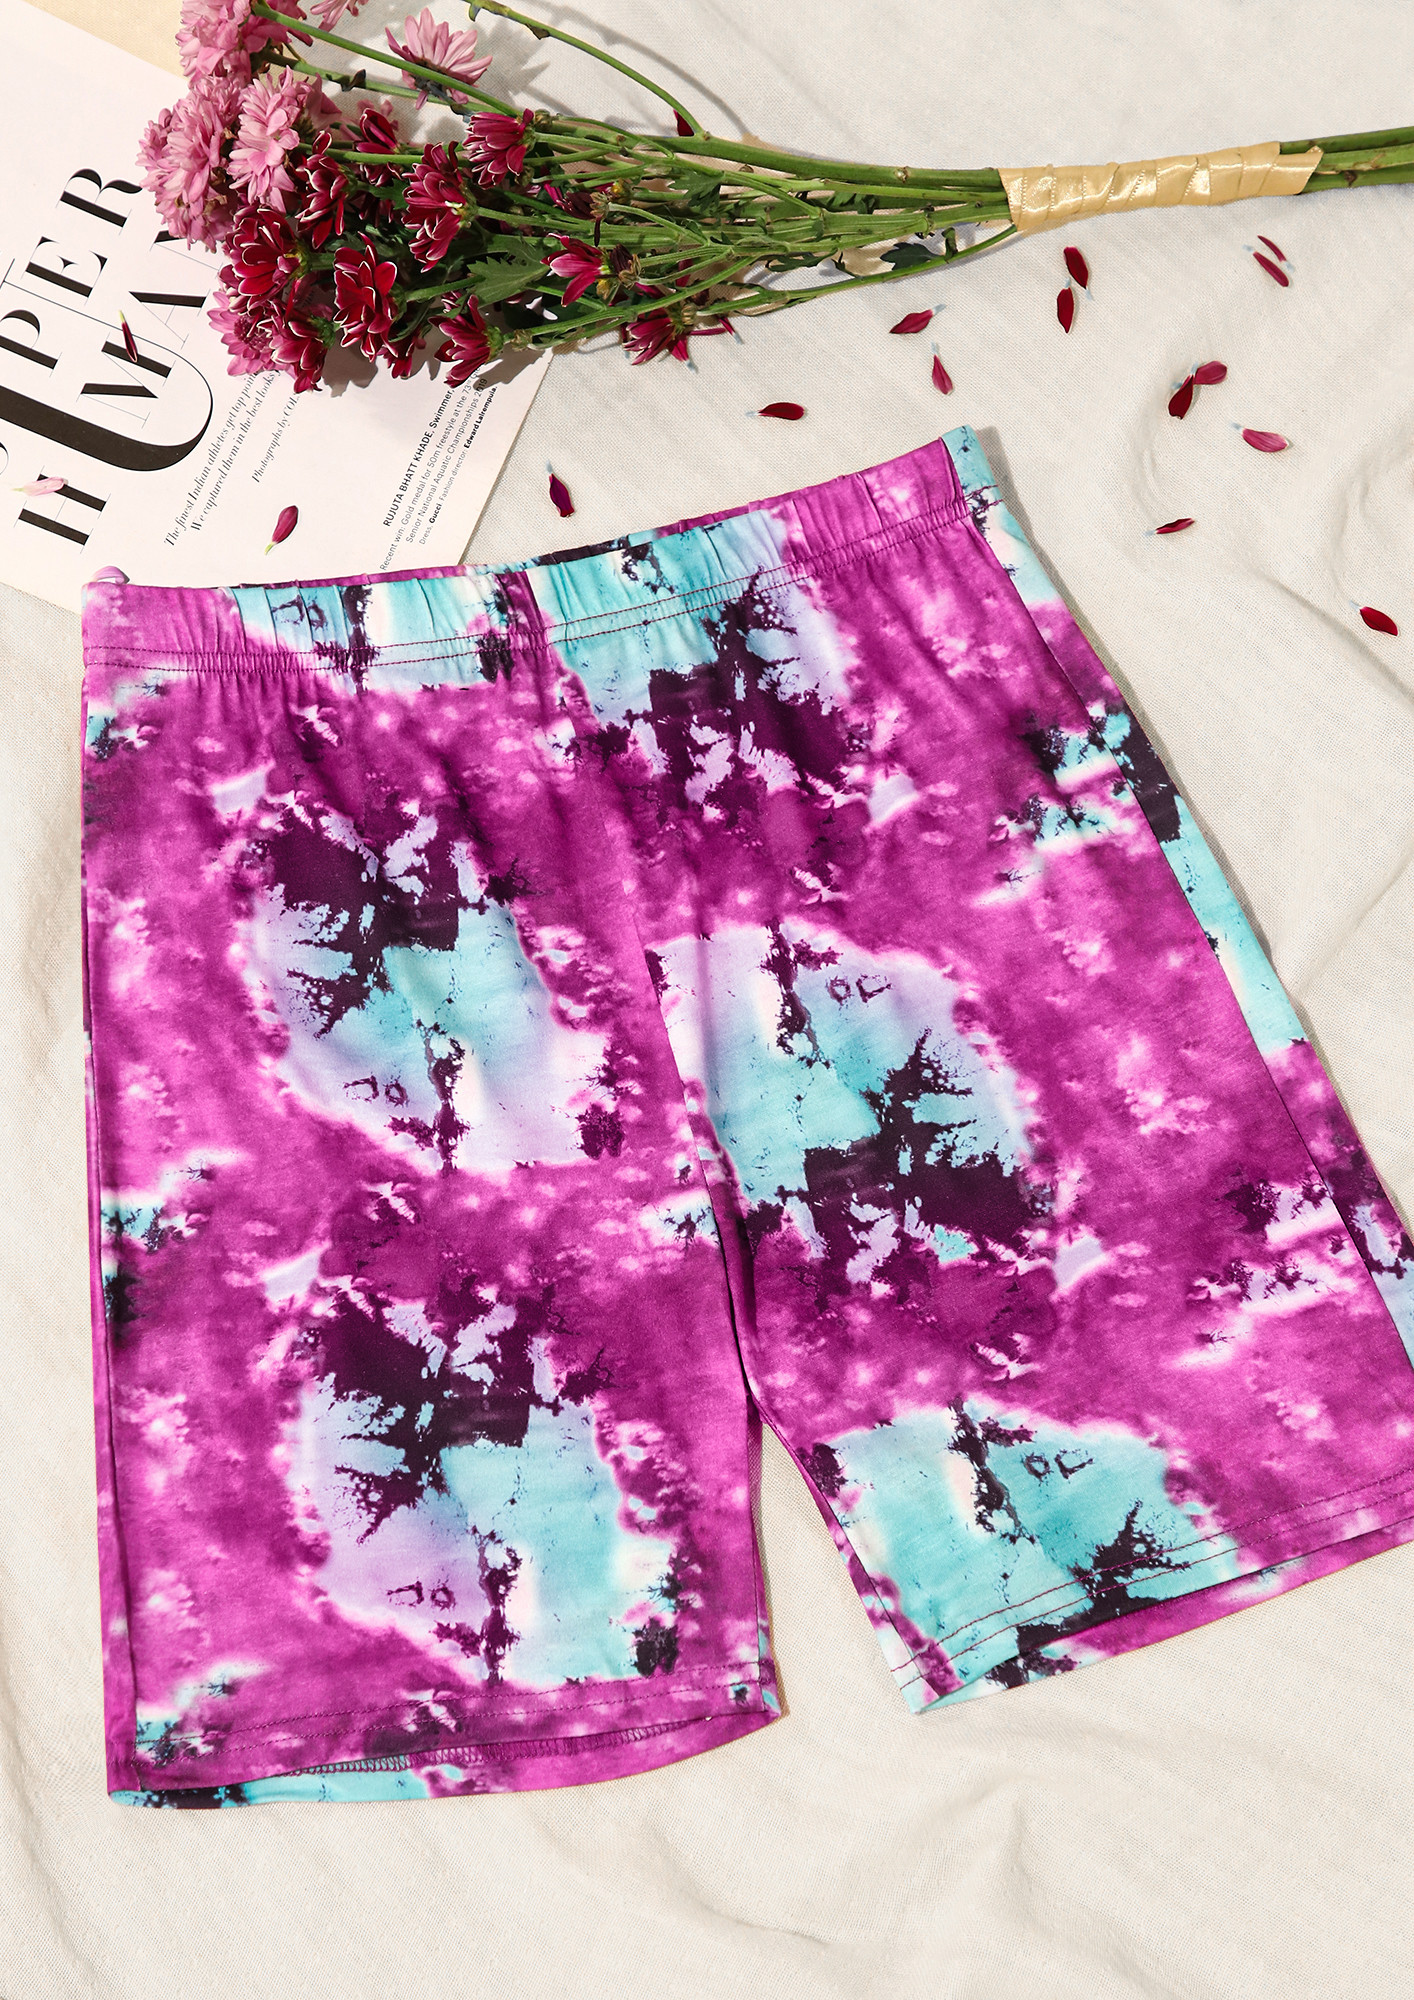 HOW ABOUT A RIDE? TIE-DYE PRINT, PURPLE CYCLING SHORTS